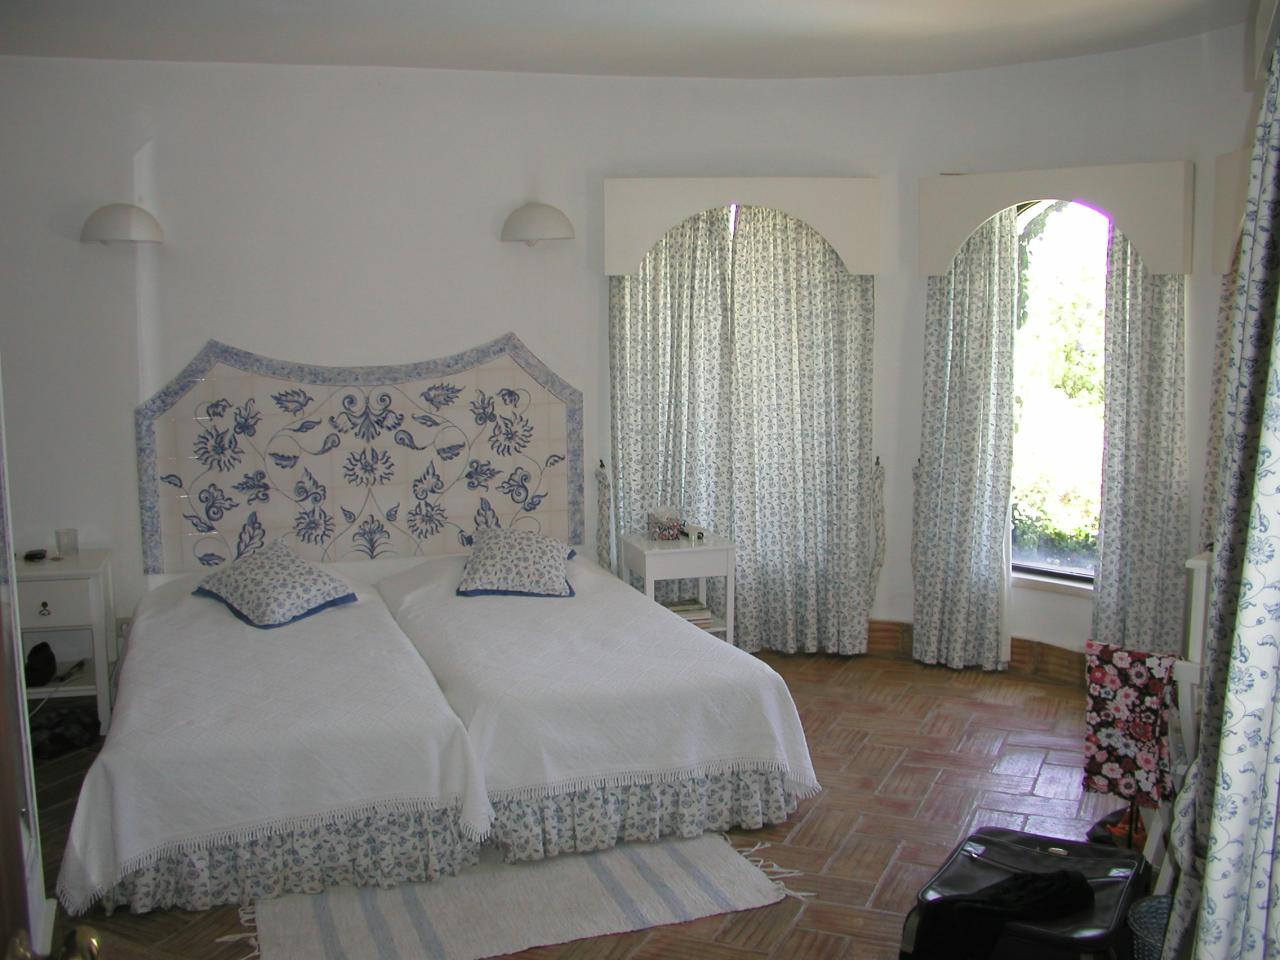 JPEG image - One of the three bedrooms ...